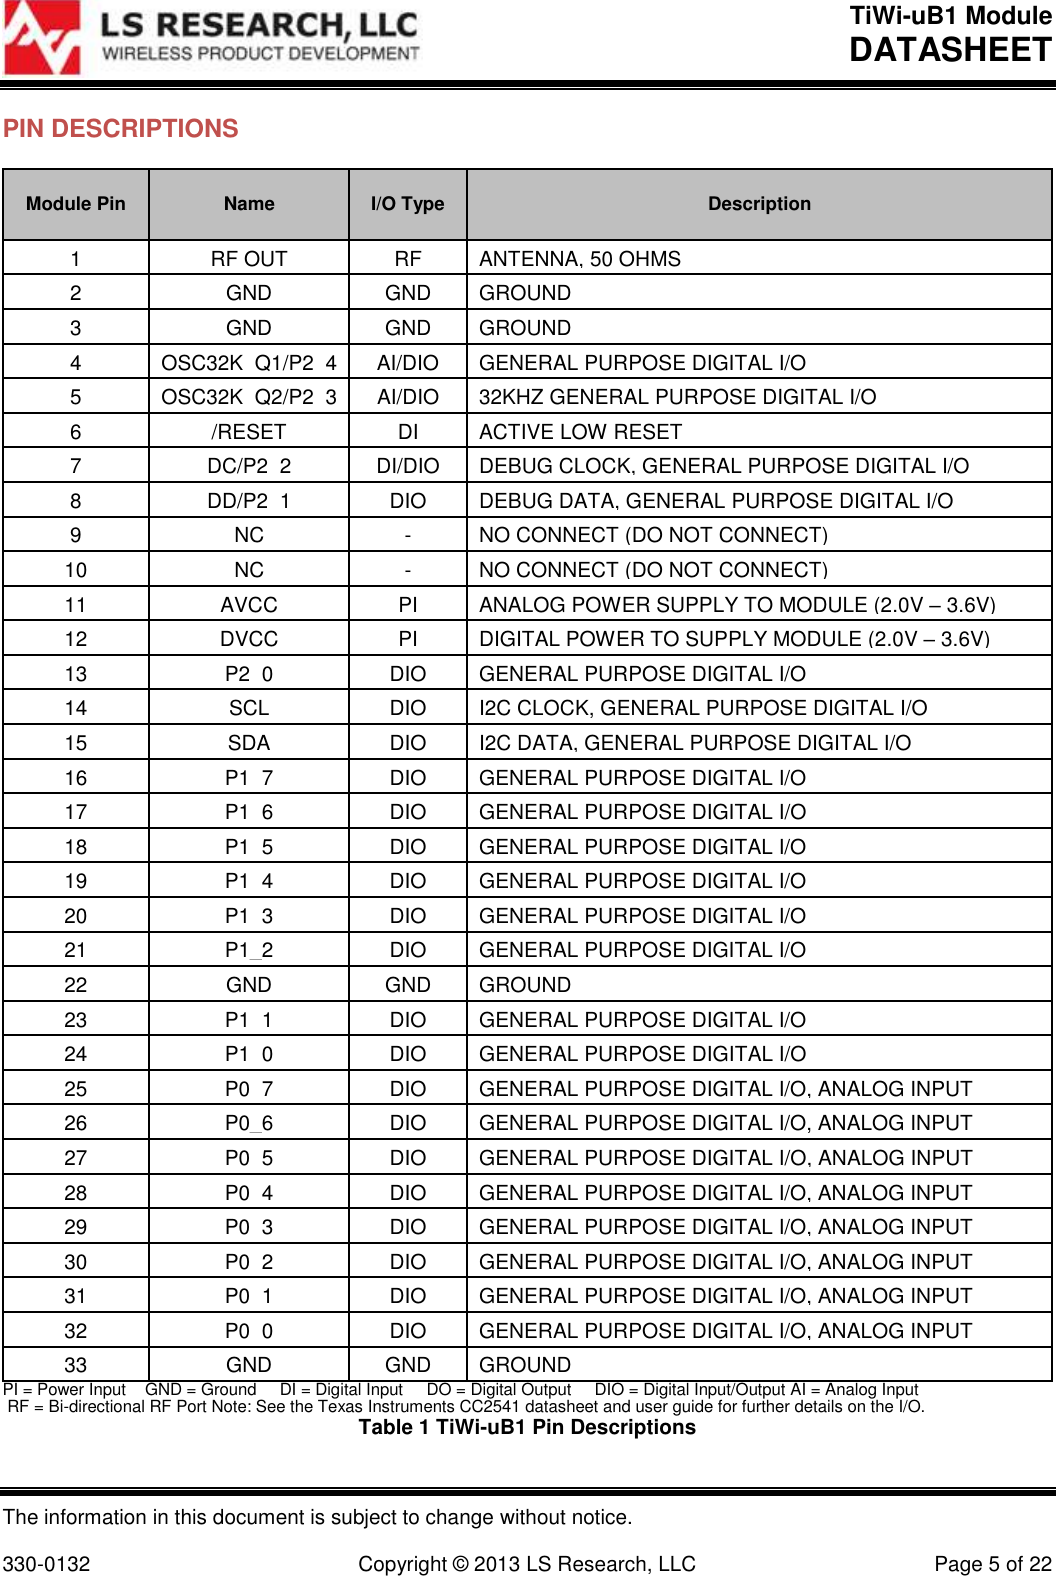 TiWi-uB1 Module DATASHEET  The information in this document is subject to change without notice.  330-0132  Copyright © 2013 LS Research, LLC  Page 5 of 22 PIN DESCRIPTIONS Module Pin Name I/O Type Description  1 RF OUT RF ANTENNA, 50 OHMS 2 GND GND GROUND 3 GND GND GROUND 4 OSC32K_Q1/P2_4 AI/DIO GENERAL PURPOSE DIGITAL I/O 5 OSC32K_Q2/P2_3 AI/DIO  32KHZ GENERAL PURPOSE DIGITAL I/O 6 /RESET DI ACTIVE LOW RESET 7 DC/P2_2 DI/DIO DEBUG CLOCK, GENERAL PURPOSE DIGITAL I/O 8 DD/P2_1 DIO DEBUG DATA, GENERAL PURPOSE DIGITAL I/O 9 NC - NO CONNECT (DO NOT CONNECT) 10 NC - NO CONNECT (DO NOT CONNECT) 11 AVCC PI ANALOG POWER SUPPLY TO MODULE (2.0V – 3.6V) 12 DVCC PI DIGITAL POWER TO SUPPLY MODULE (2.0V – 3.6V) 13 P2_0 DIO GENERAL PURPOSE DIGITAL I/O 14 SCL DIO I2C CLOCK, GENERAL PURPOSE DIGITAL I/O 15 SDA DIO I2C DATA, GENERAL PURPOSE DIGITAL I/O 16 P1_7 DIO GENERAL PURPOSE DIGITAL I/O 17 P1_6 DIO GENERAL PURPOSE DIGITAL I/O 18 P1_5 DIO GENERAL PURPOSE DIGITAL I/O 19 P1_4 DIO GENERAL PURPOSE DIGITAL I/O 20 P1_3 DIO GENERAL PURPOSE DIGITAL I/O 21 P1_2 DIO GENERAL PURPOSE DIGITAL I/O 22 GND GND GROUND 23 P1_1 DIO GENERAL PURPOSE DIGITAL I/O 24 P1_0 DIO GENERAL PURPOSE DIGITAL I/O 25 P0_7 DIO GENERAL PURPOSE DIGITAL I/O, ANALOG INPUT 26 P0_6 DIO GENERAL PURPOSE DIGITAL I/O, ANALOG INPUT 27 P0_5 DIO GENERAL PURPOSE DIGITAL I/O, ANALOG INPUT 28 P0_4 DIO GENERAL PURPOSE DIGITAL I/O, ANALOG INPUT 29 P0_3 DIO GENERAL PURPOSE DIGITAL I/O, ANALOG INPUT 30 P0_2 DIO GENERAL PURPOSE DIGITAL I/O, ANALOG INPUT 31 P0_1 DIO GENERAL PURPOSE DIGITAL I/O, ANALOG INPUT 32 P0_0 DIO GENERAL PURPOSE DIGITAL I/O, ANALOG INPUT 33 GND GND GROUND PI = Power Input    GND = Ground     DI = Digital Input     DO = Digital Output     DIO = Digital Input/Output AI = Analog Input     RF = Bi-directional RF Port Note: See the Texas Instruments CC2541 datasheet and user guide for further details on the I/O. Table 1 TiWi-uB1 Pin Descriptions 